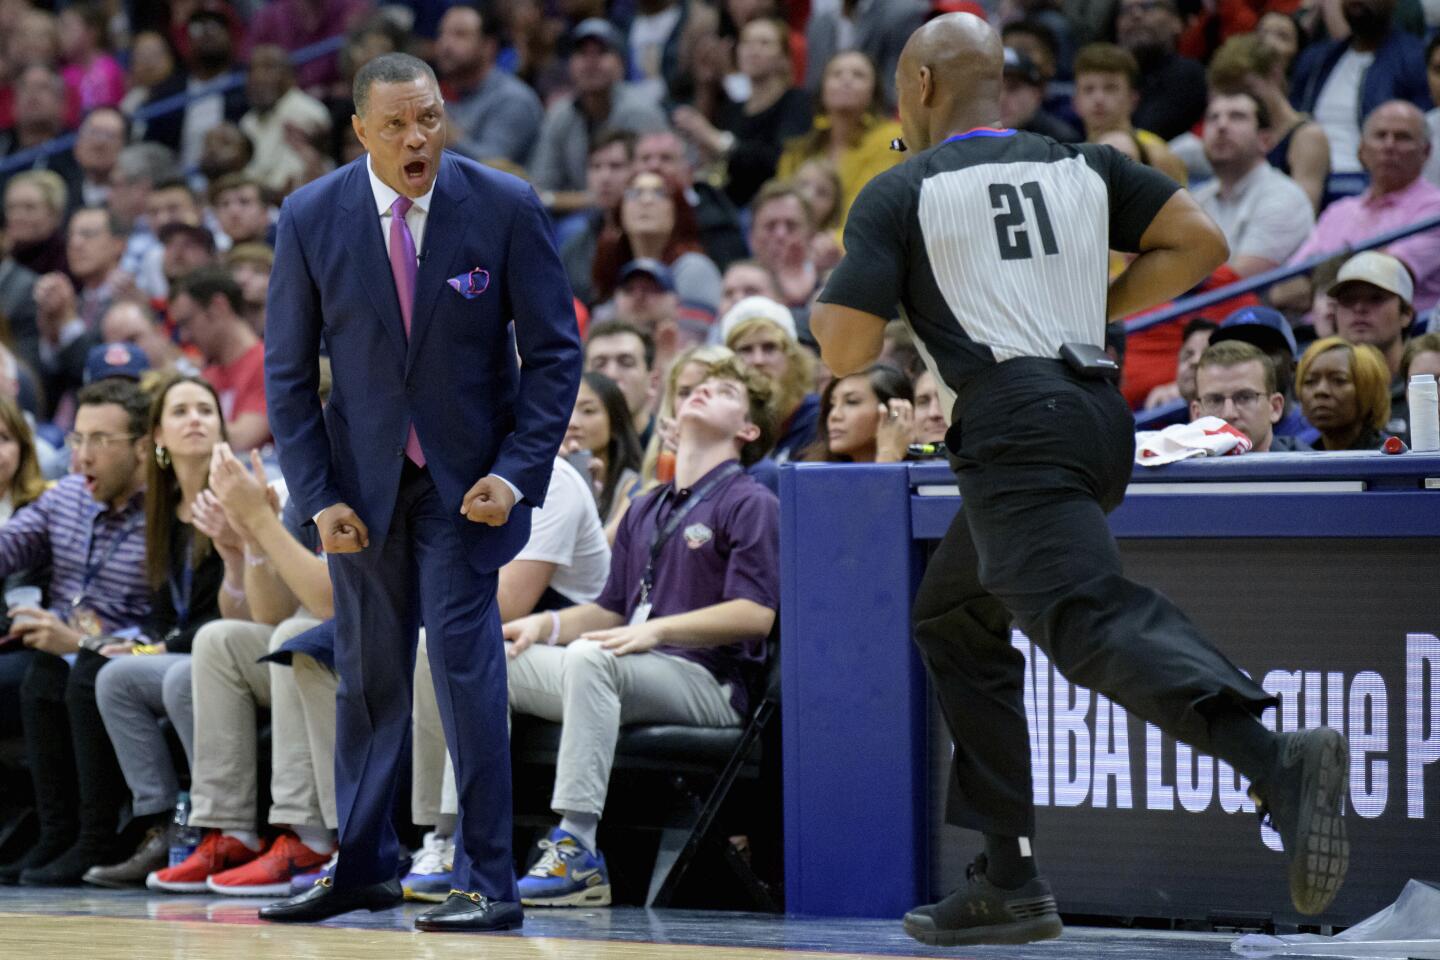 Pelicans coach Alvin Gentry yells at referee Dedric Taylor (21) during the second half of a game Nov. 27 against the Lakers.